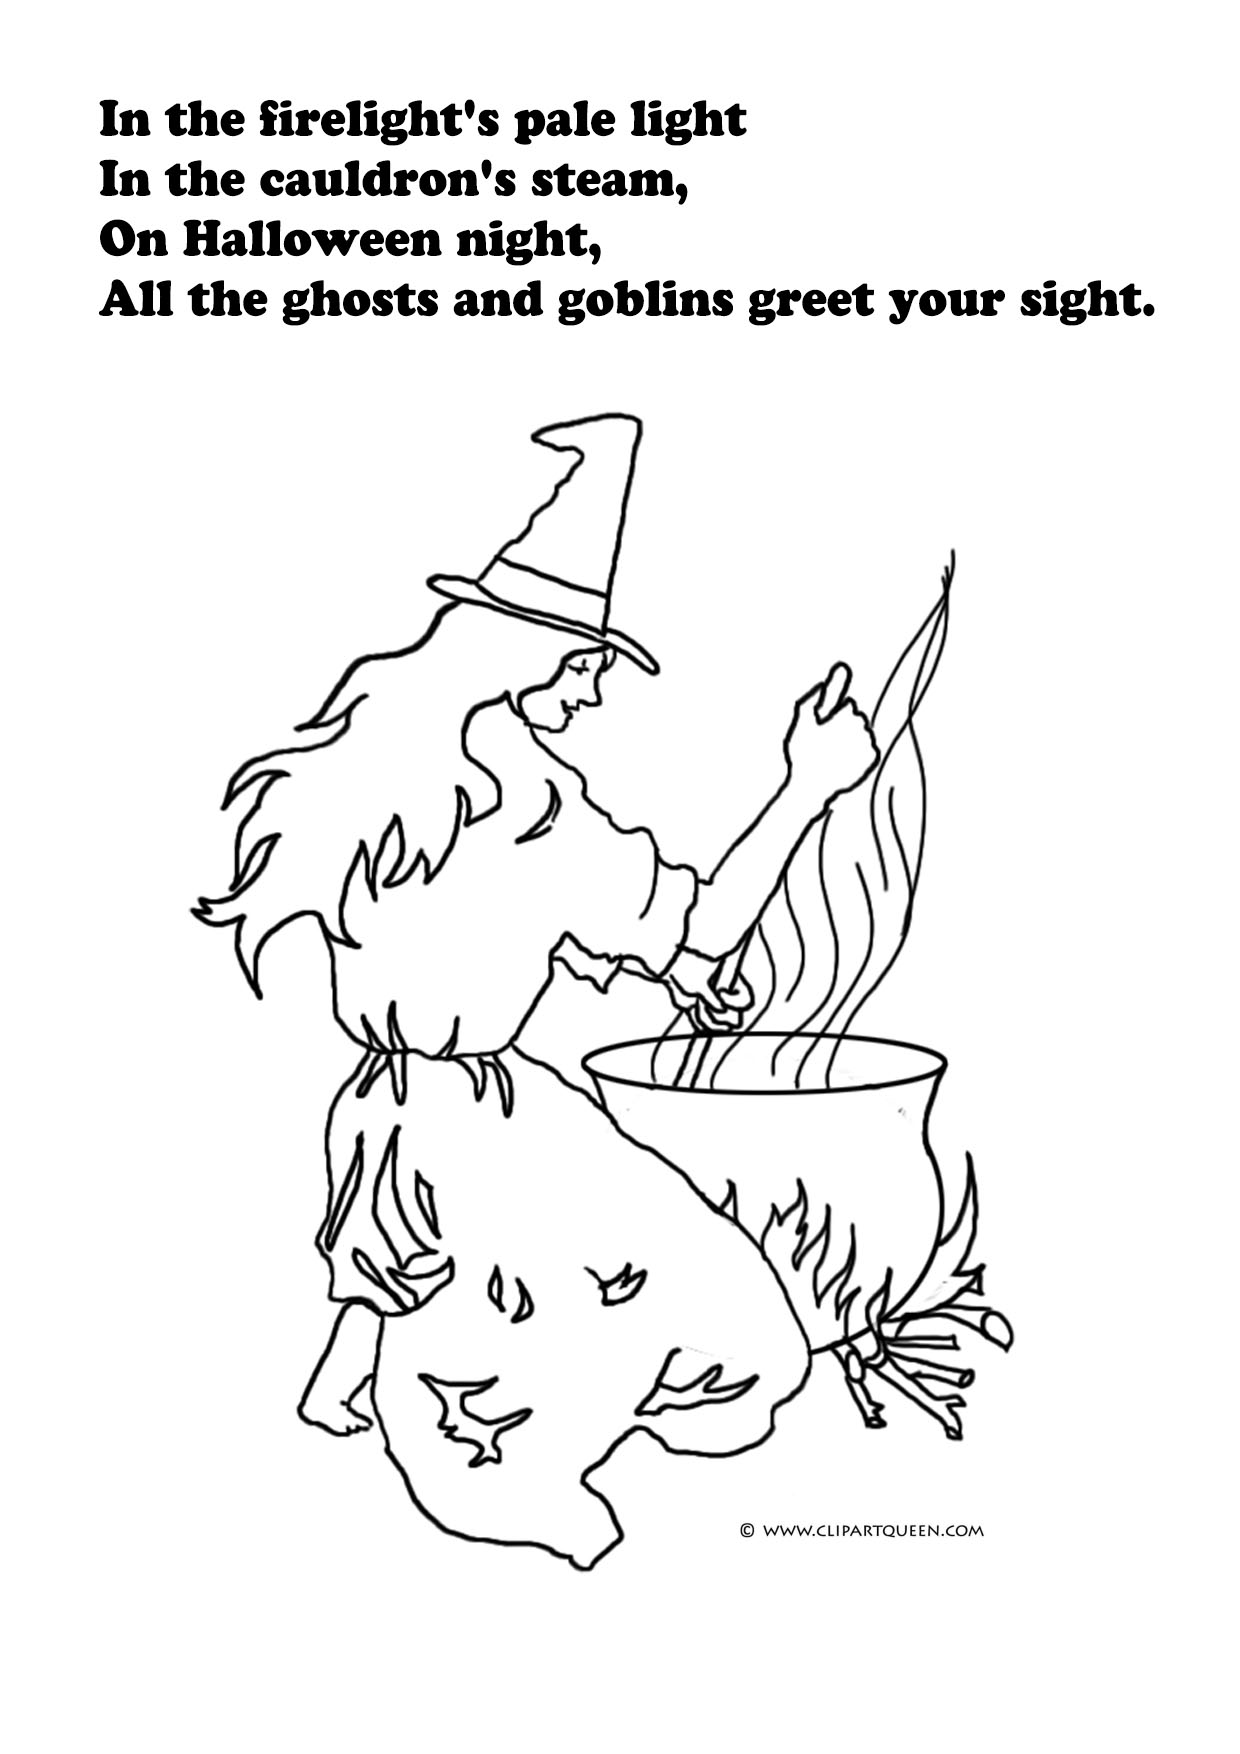 Halloween coloring sheet with witch and cauldron